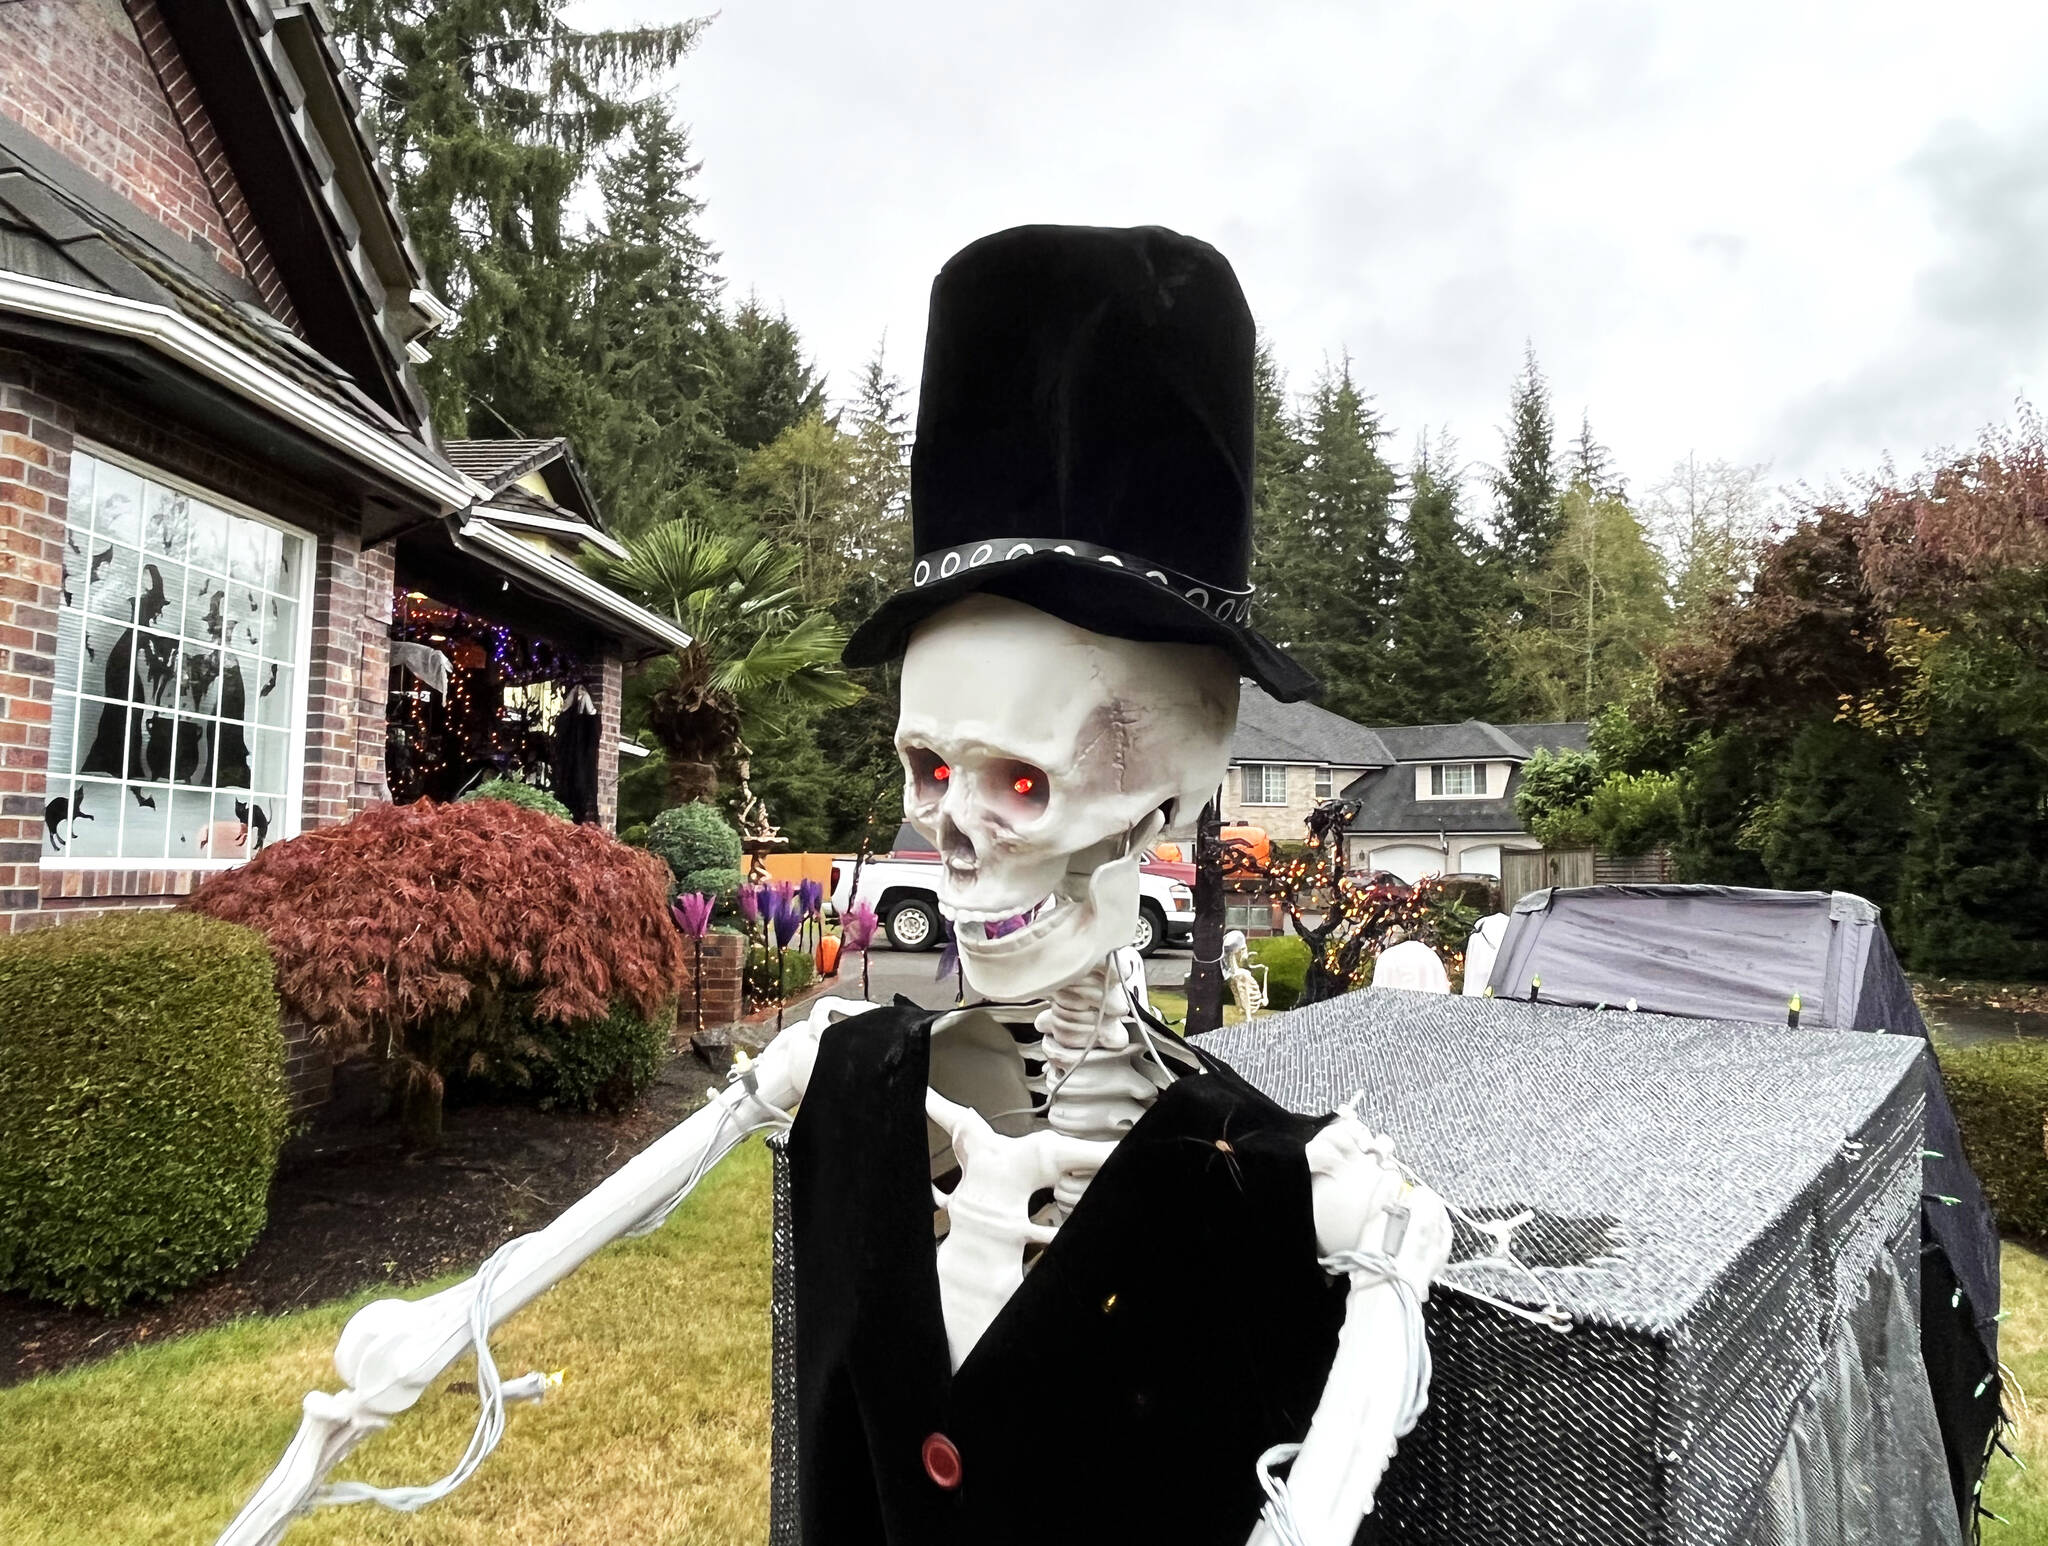 Matthew N. Wells / The Daily World
A skeleton hearse driver navigates through the front yard of Dennis and Michelle Bemis’ home in the 1000 block of Fairway Drive, while the skeleton driver’s “deceased” passenger drags behind and screams in silent terror.